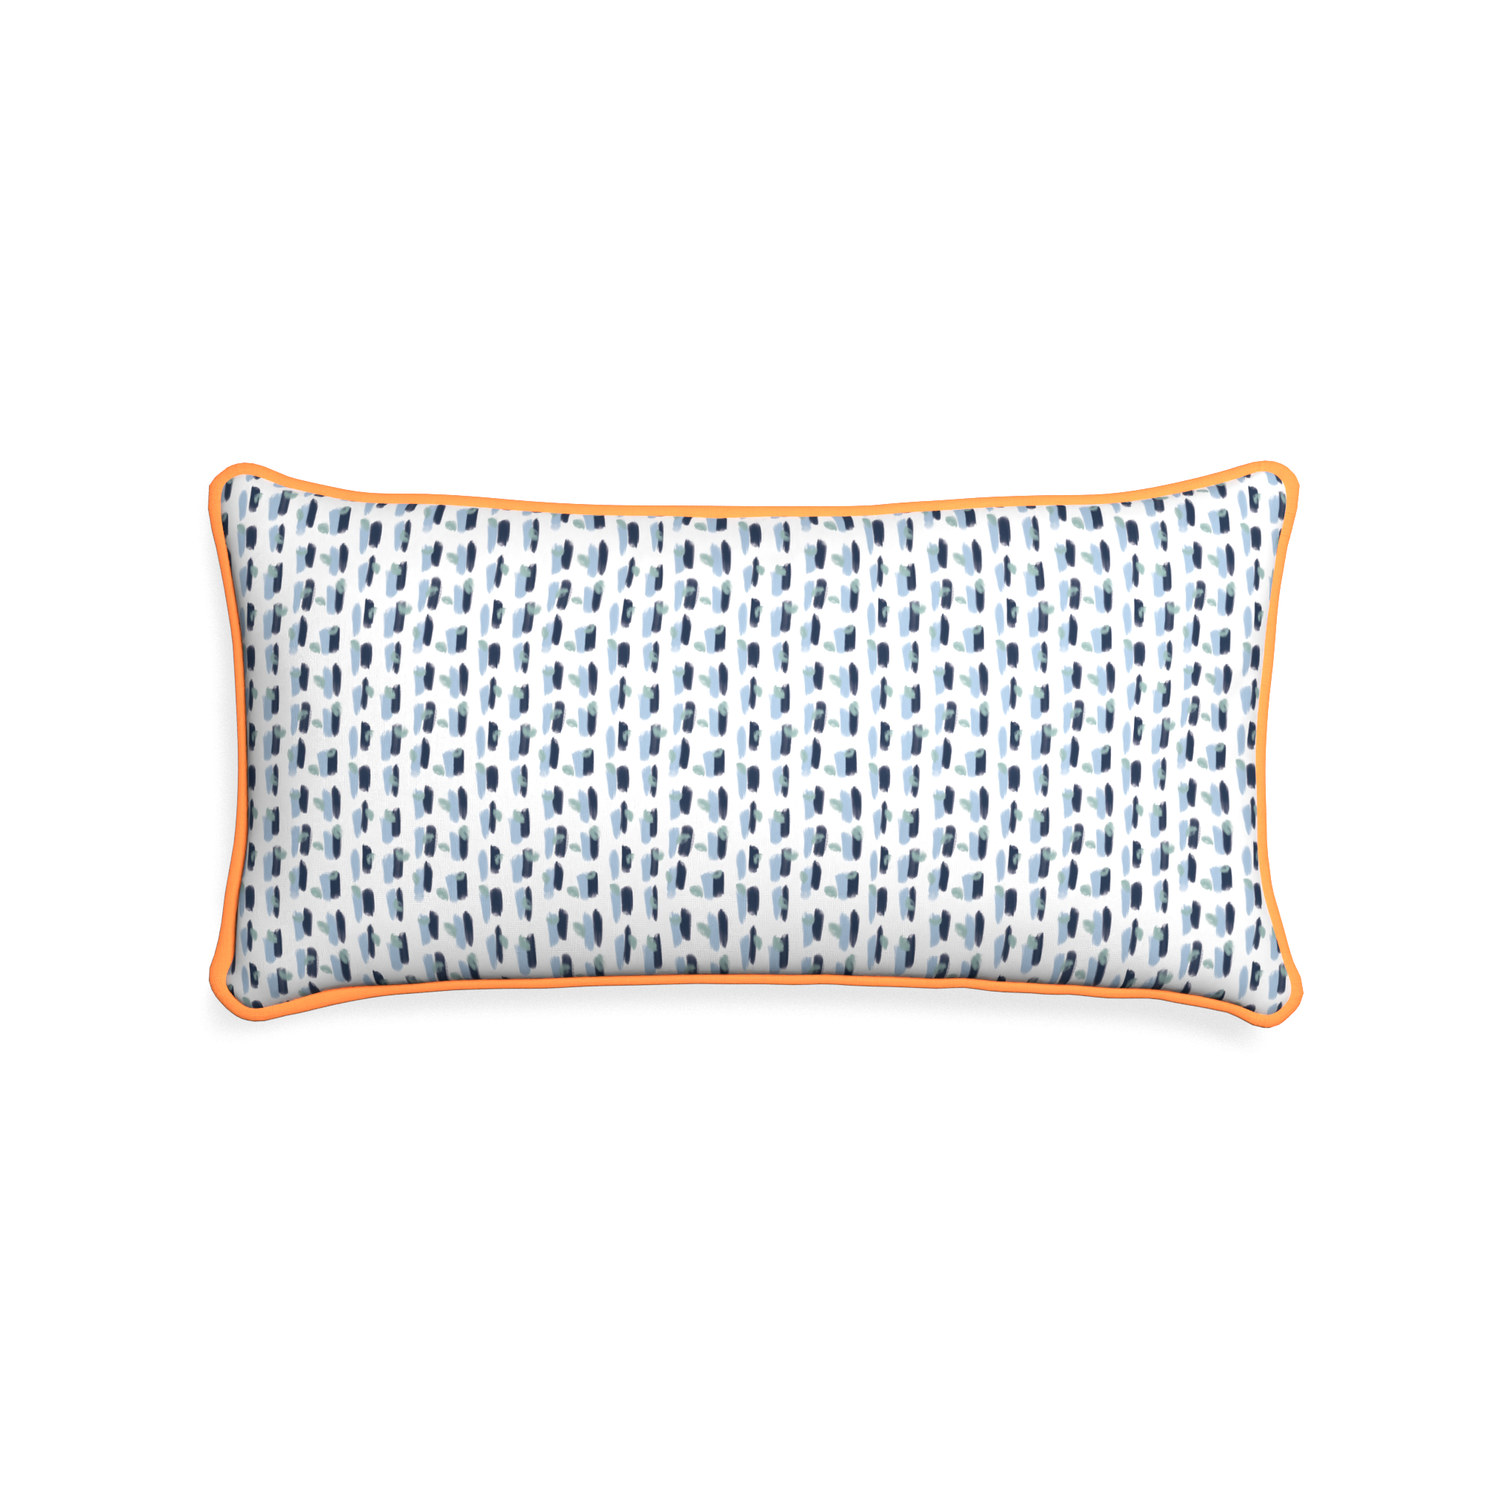 Midi-lumbar poppy custom blue and whitepillow with clementine piping on white background